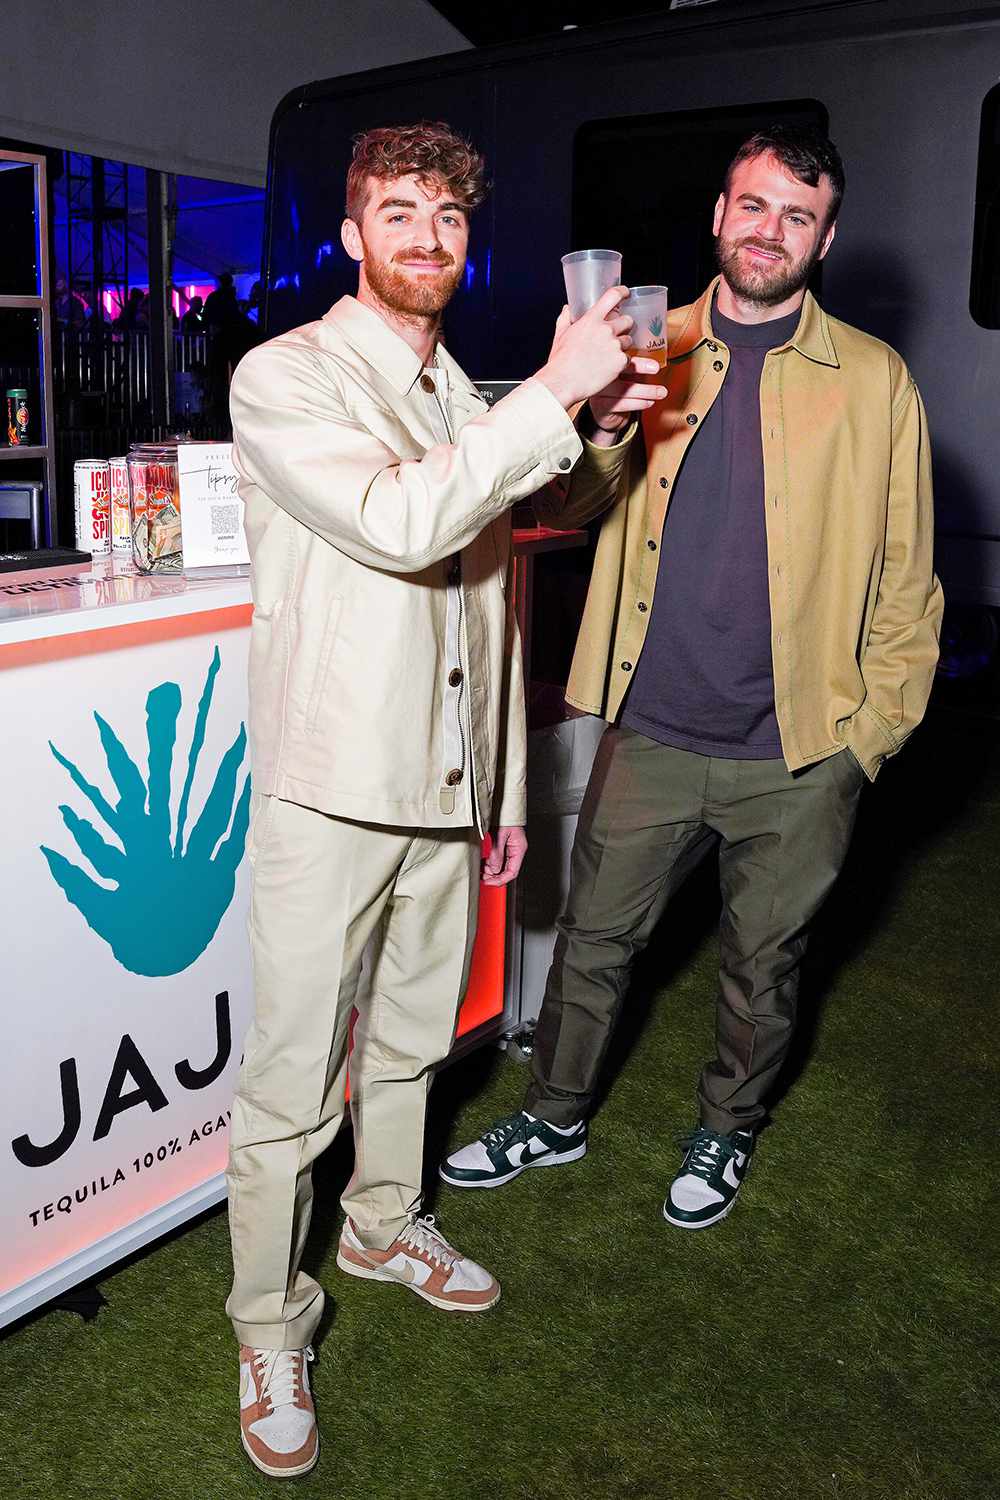 Andrew Taggart and Alex Pall of The Chainsmokers attend The Chainsmokers and JAJA Tequila celebrate Big Game Weekend at the MaximBet Music at The Market powered by DirecTV at City Market on February 12, 2022 in Los Angeles, California.